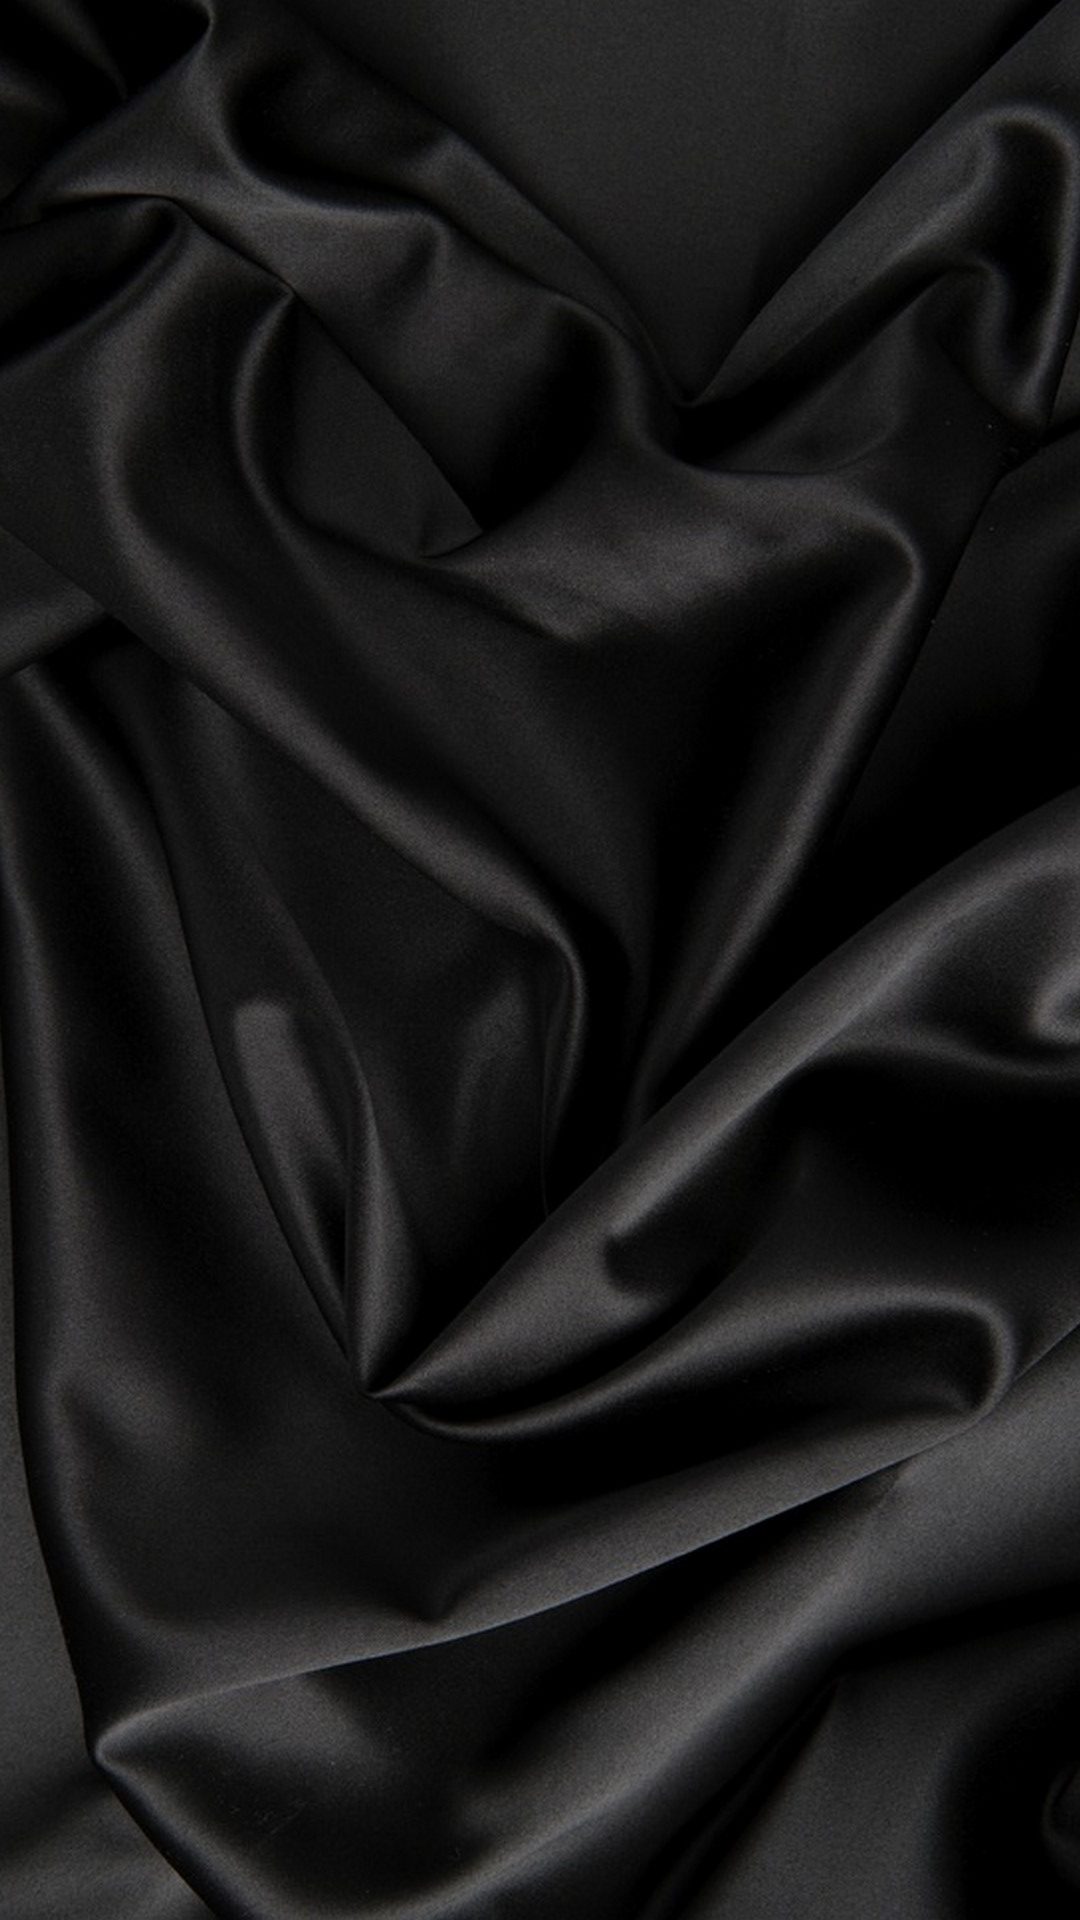 Black Silk iPhone 8 Wallpaper With high-resolution 1920X1080 pixel. You can use this wallpaper for your iPhone 5, 6, 7, 8, X, XS, XR backgrounds, Mobile Screensaver, or iPad Lock Screen